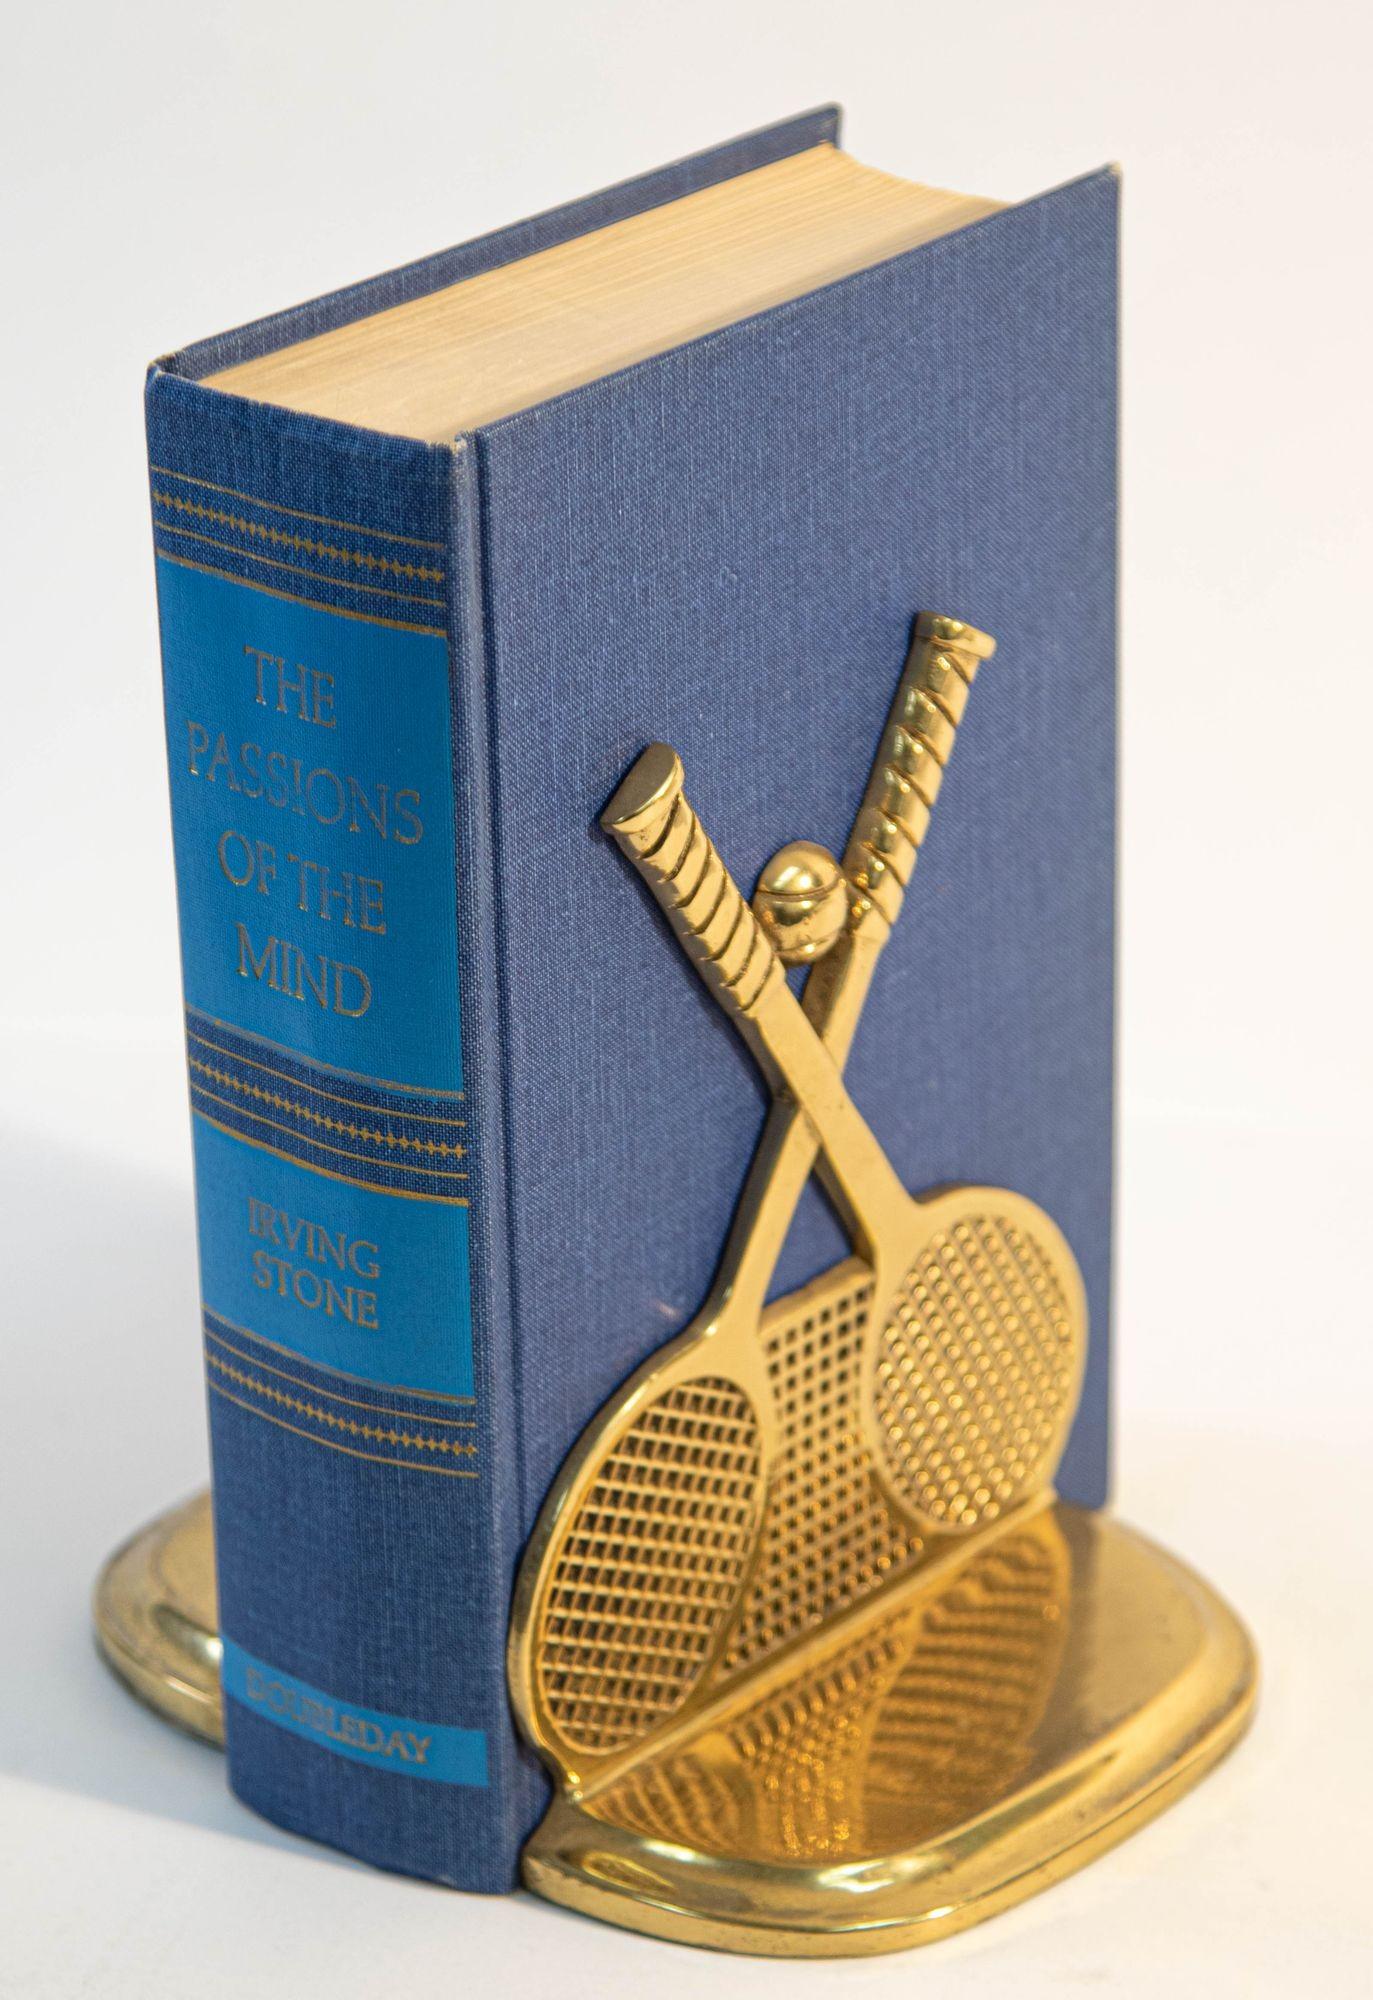 Pair of vintage brass tennis racket and ball bookends.
This pair of vintage cast brass bookends feature a tennis racquet sculptures on each with a ball in front of a tennis net.
Vintage from the late 1970s-1980s these brass tennis racket and ball